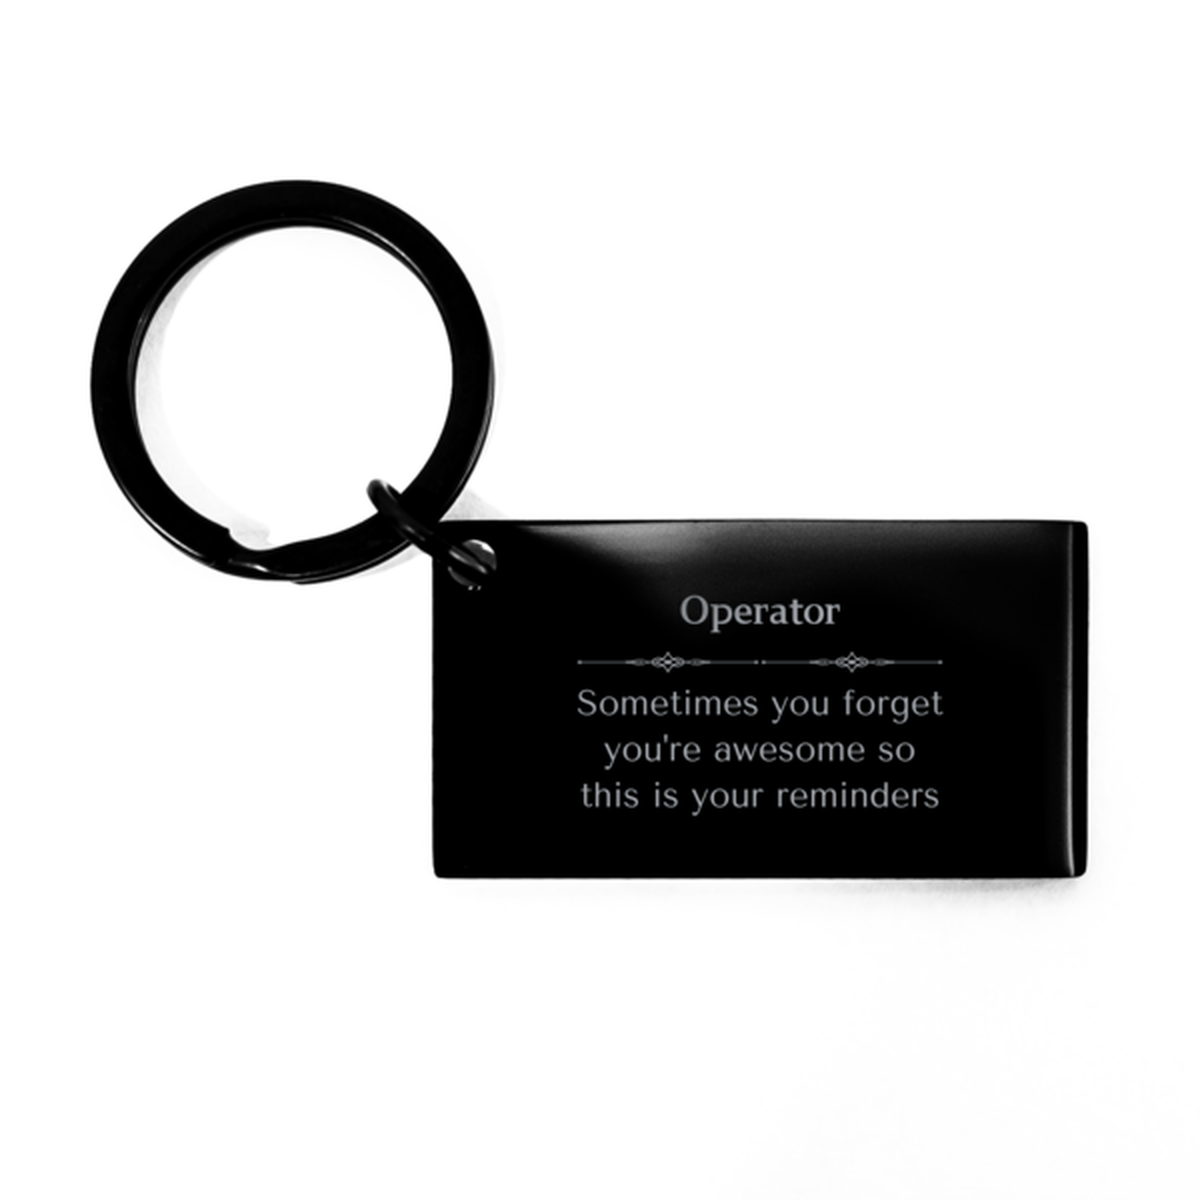 Sentimental Operator Keychain, Police Officer Sometimes you forget you're awesome so this is your reminders, Graduation Christmas Birthday Gifts for Operator, Men, Women, Coworkers